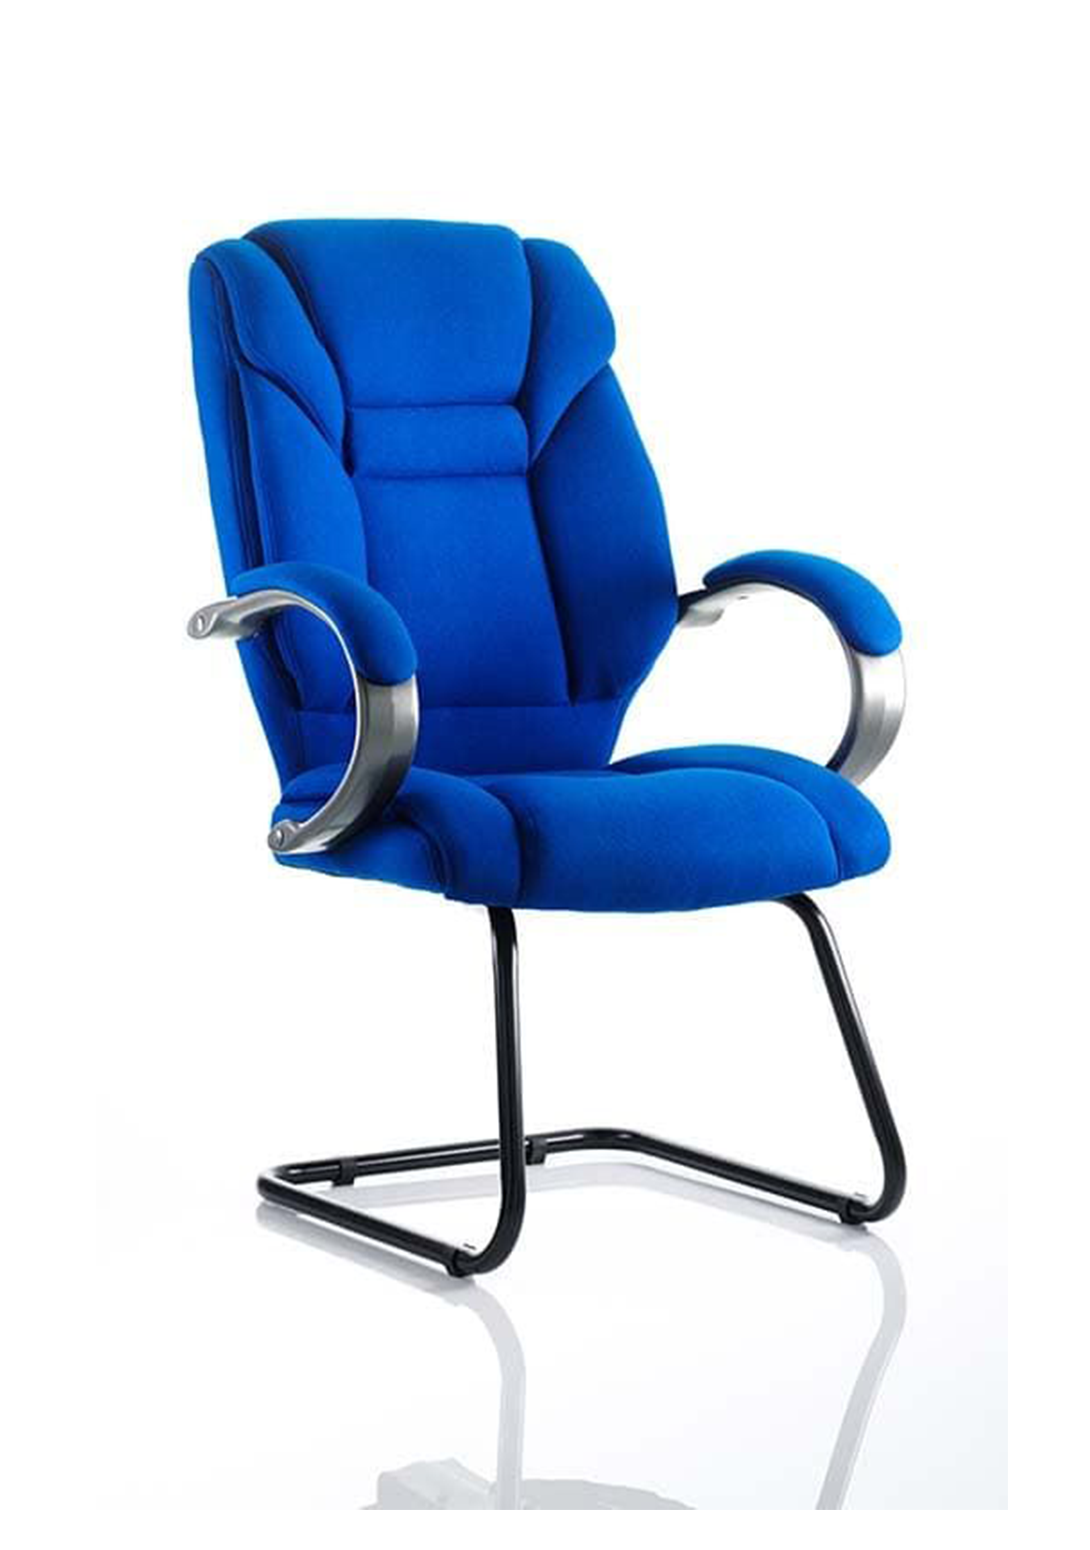 Galloway Cantilever Chair